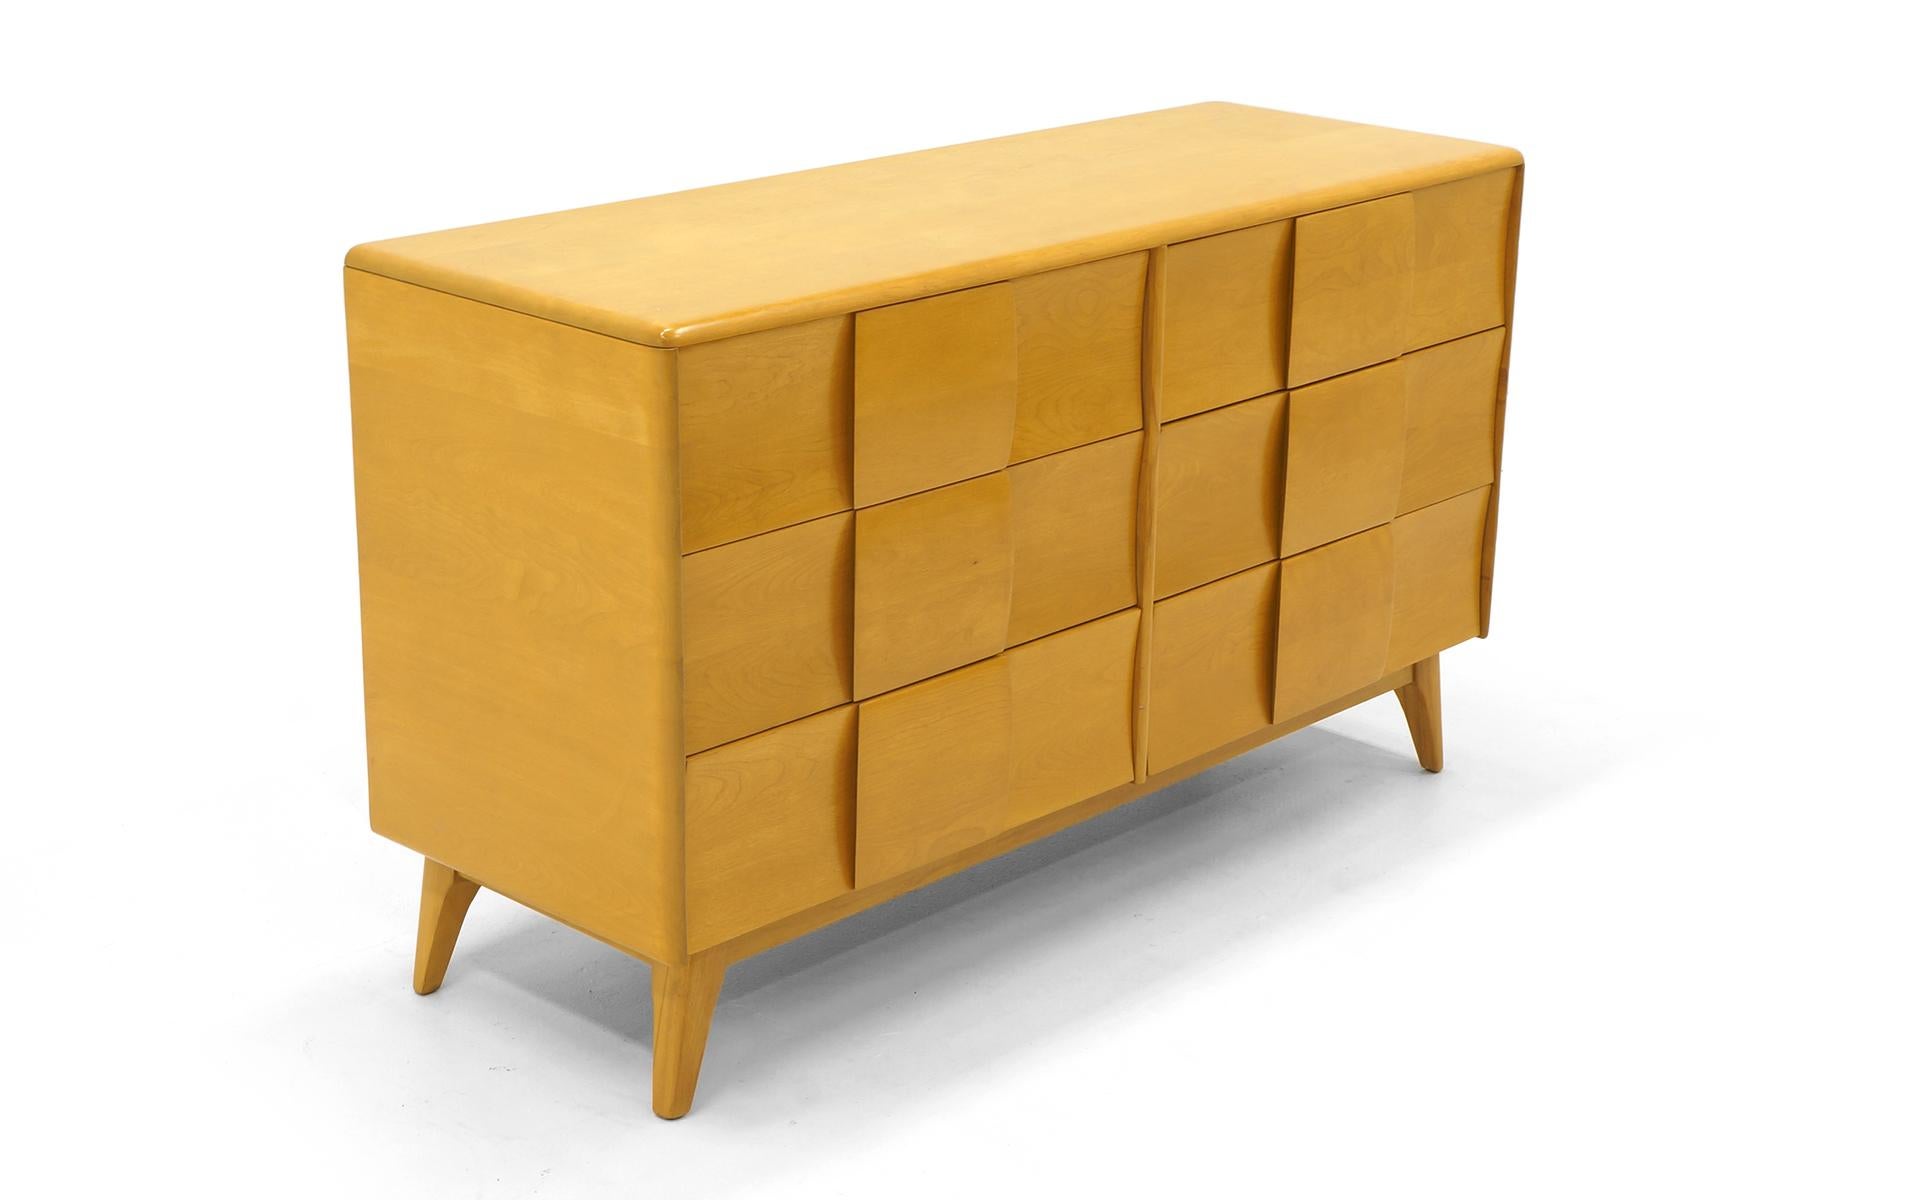 Heywood Wakefield six-drawer dresser in Champagne finish. The Sculptura line is the only Heywood Wakefield designs we buy and sell. Striking looks and great functionality. Solid birch construction. We have a listing for the same dresser in wheat